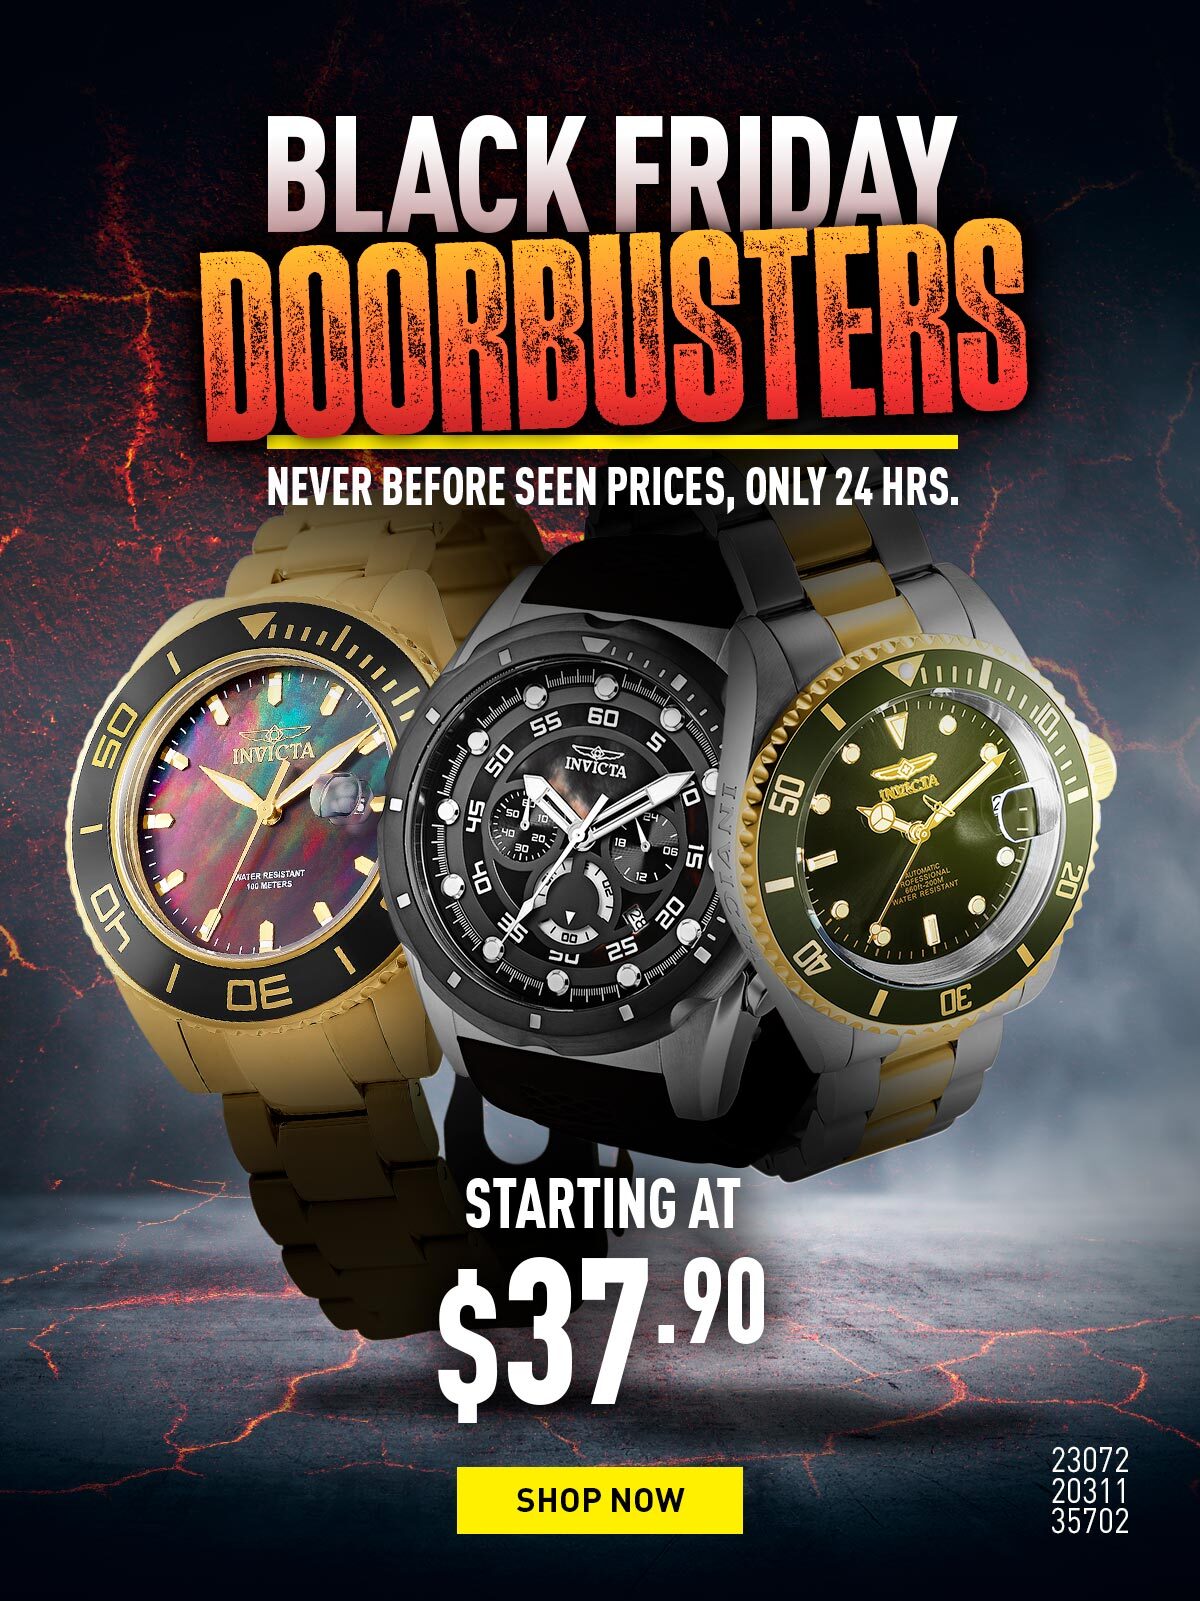 Black Friday DoorBusters, Never Before Seen Prices, Only 24 Hrs.